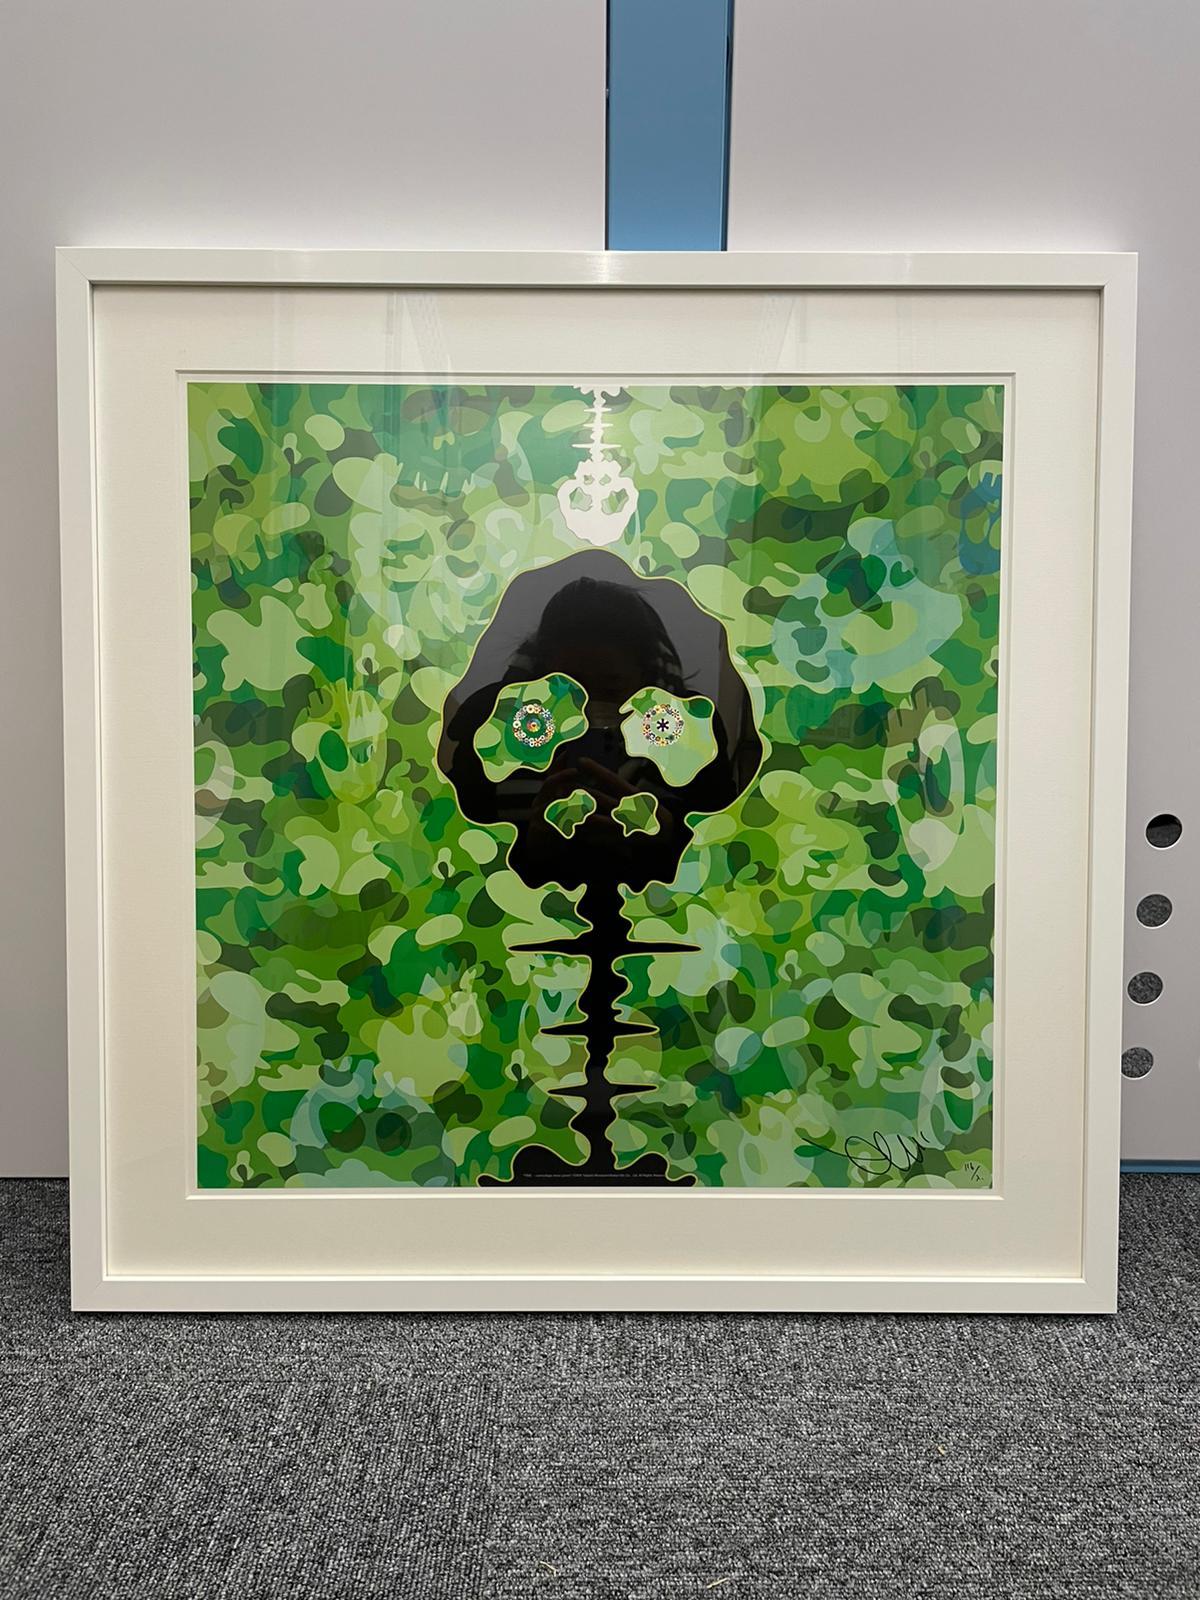 Time Bokan, camouflage moss green, 2009 by Takashi Murakami
Offset print, numbered and signed by the artist
in gold and silver ink
19 11/16 × 19 11/16 in
50 × 50 cm
Edition  116/300

Dokuro (literally starving skeleton) are legendary creatures in